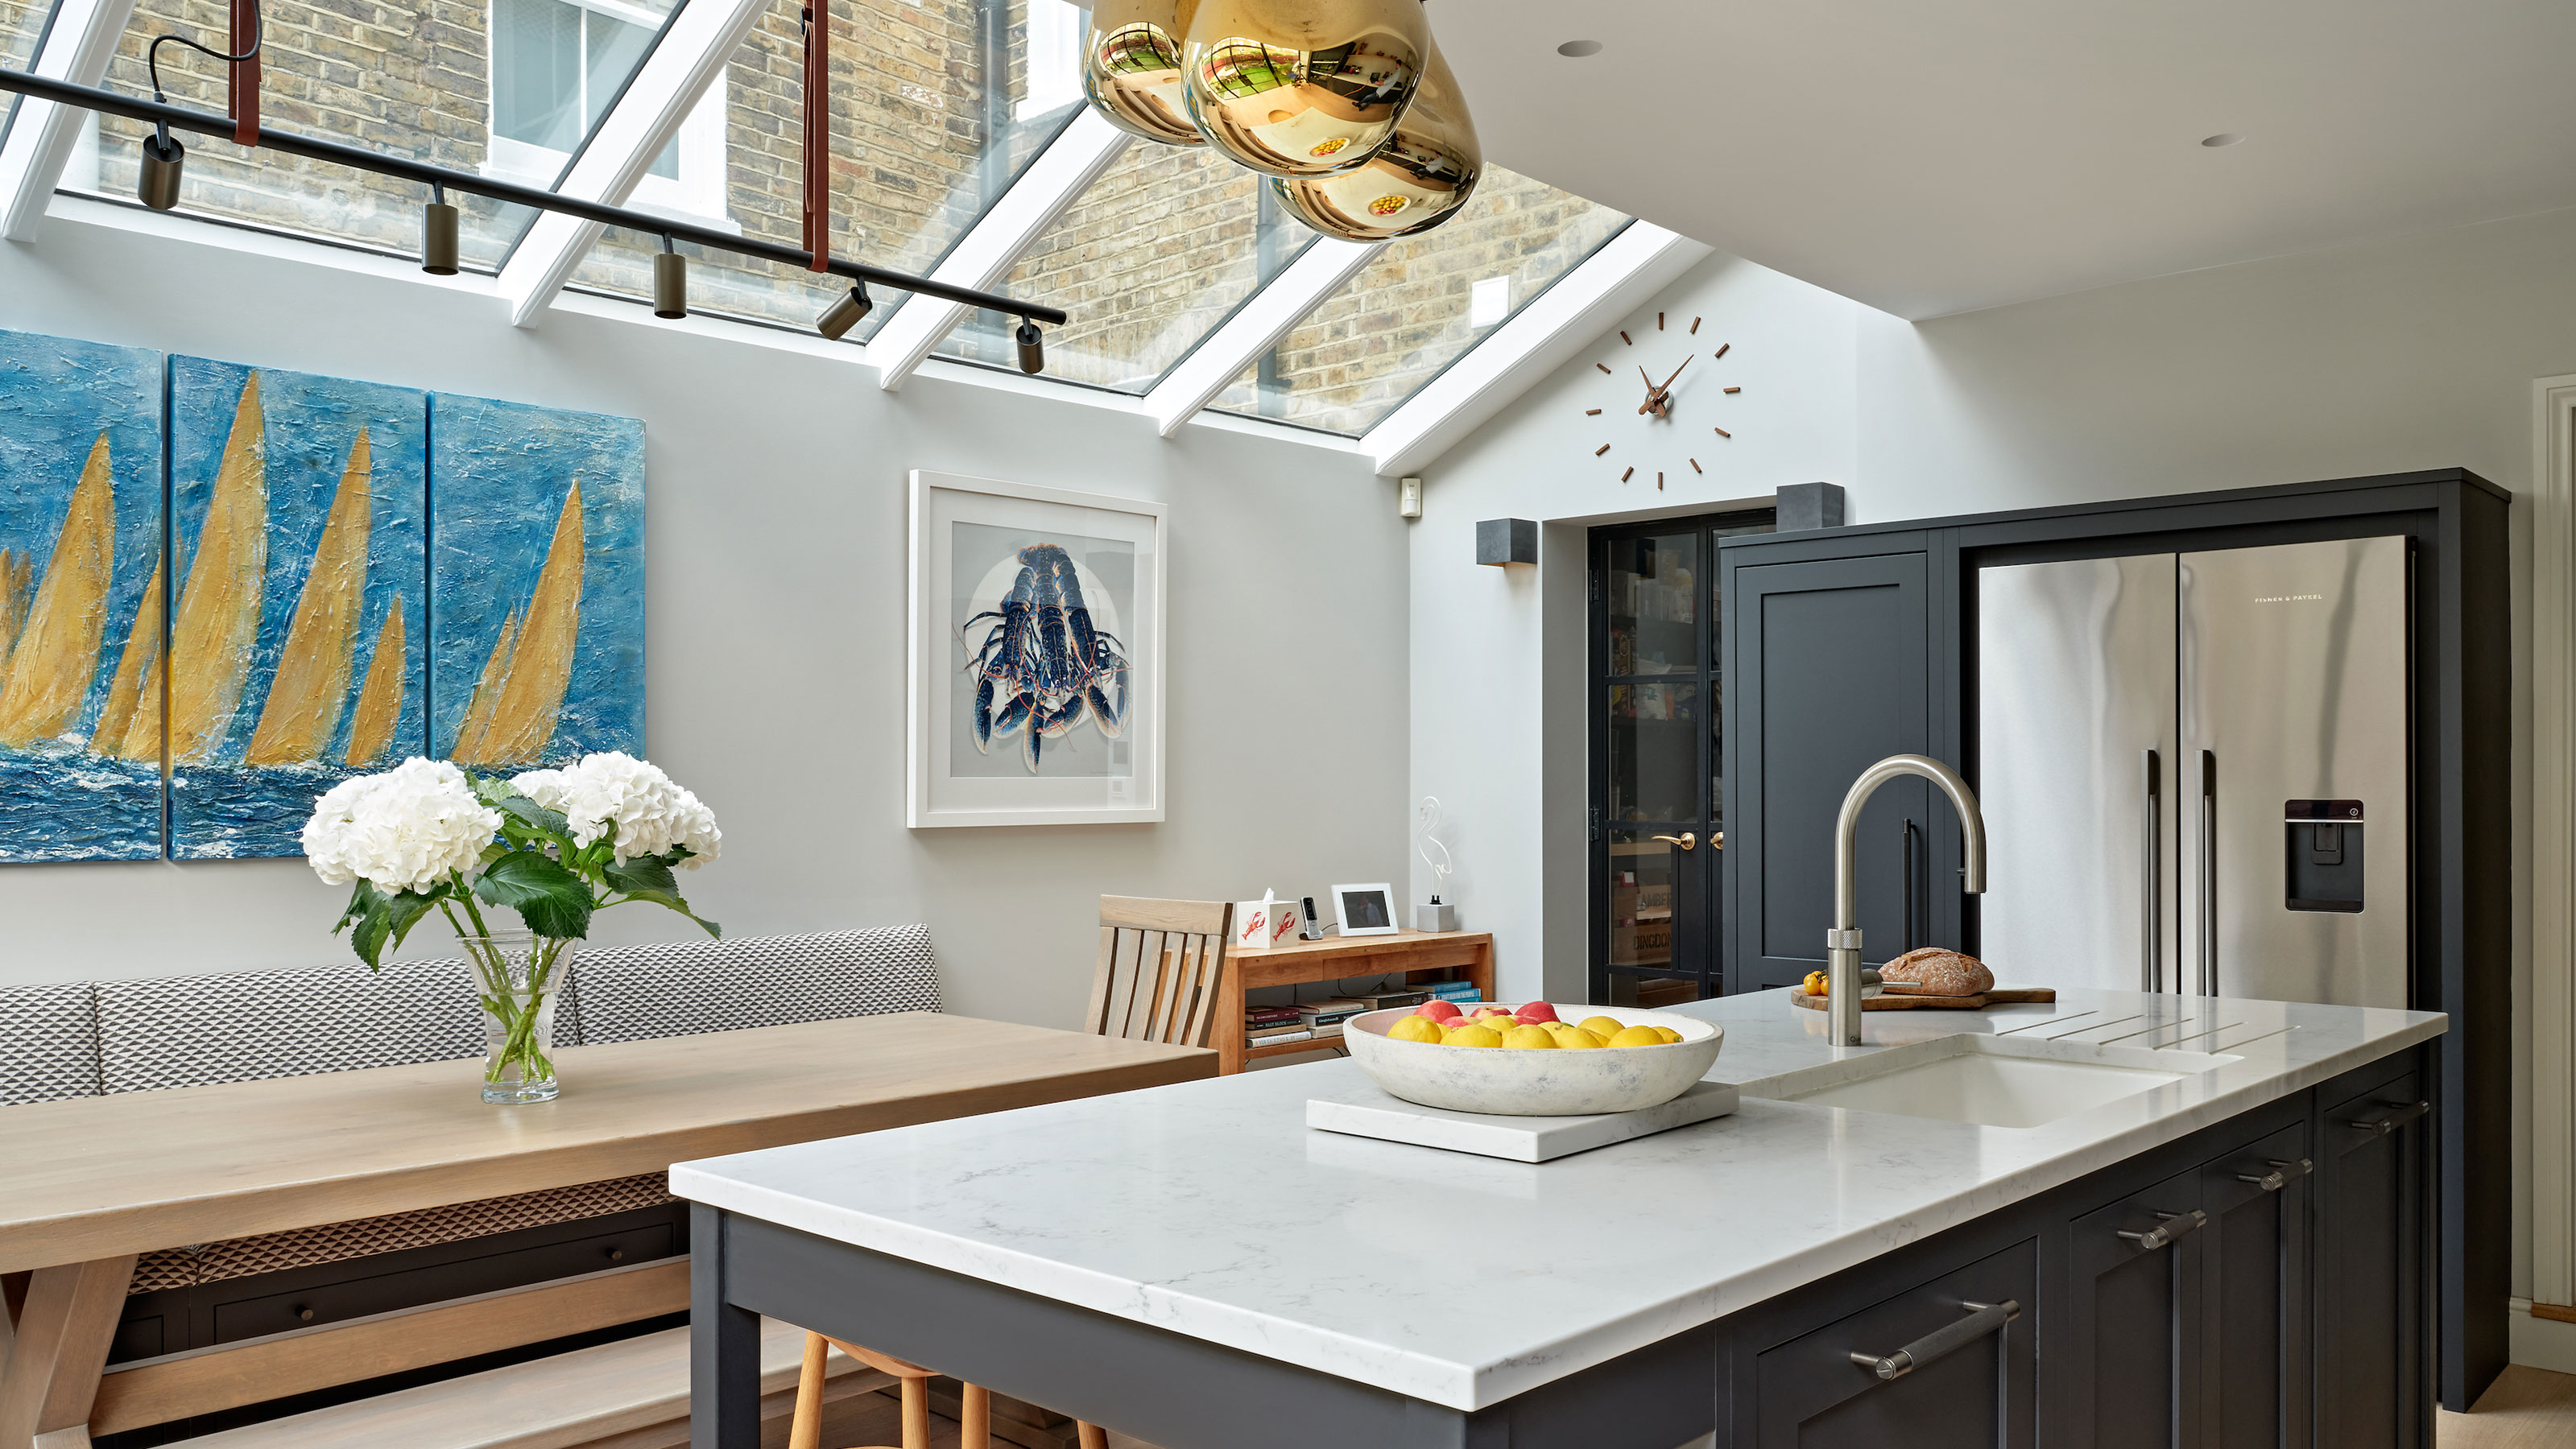 does a kitchen extension add value? we ask the experts | homebuilding